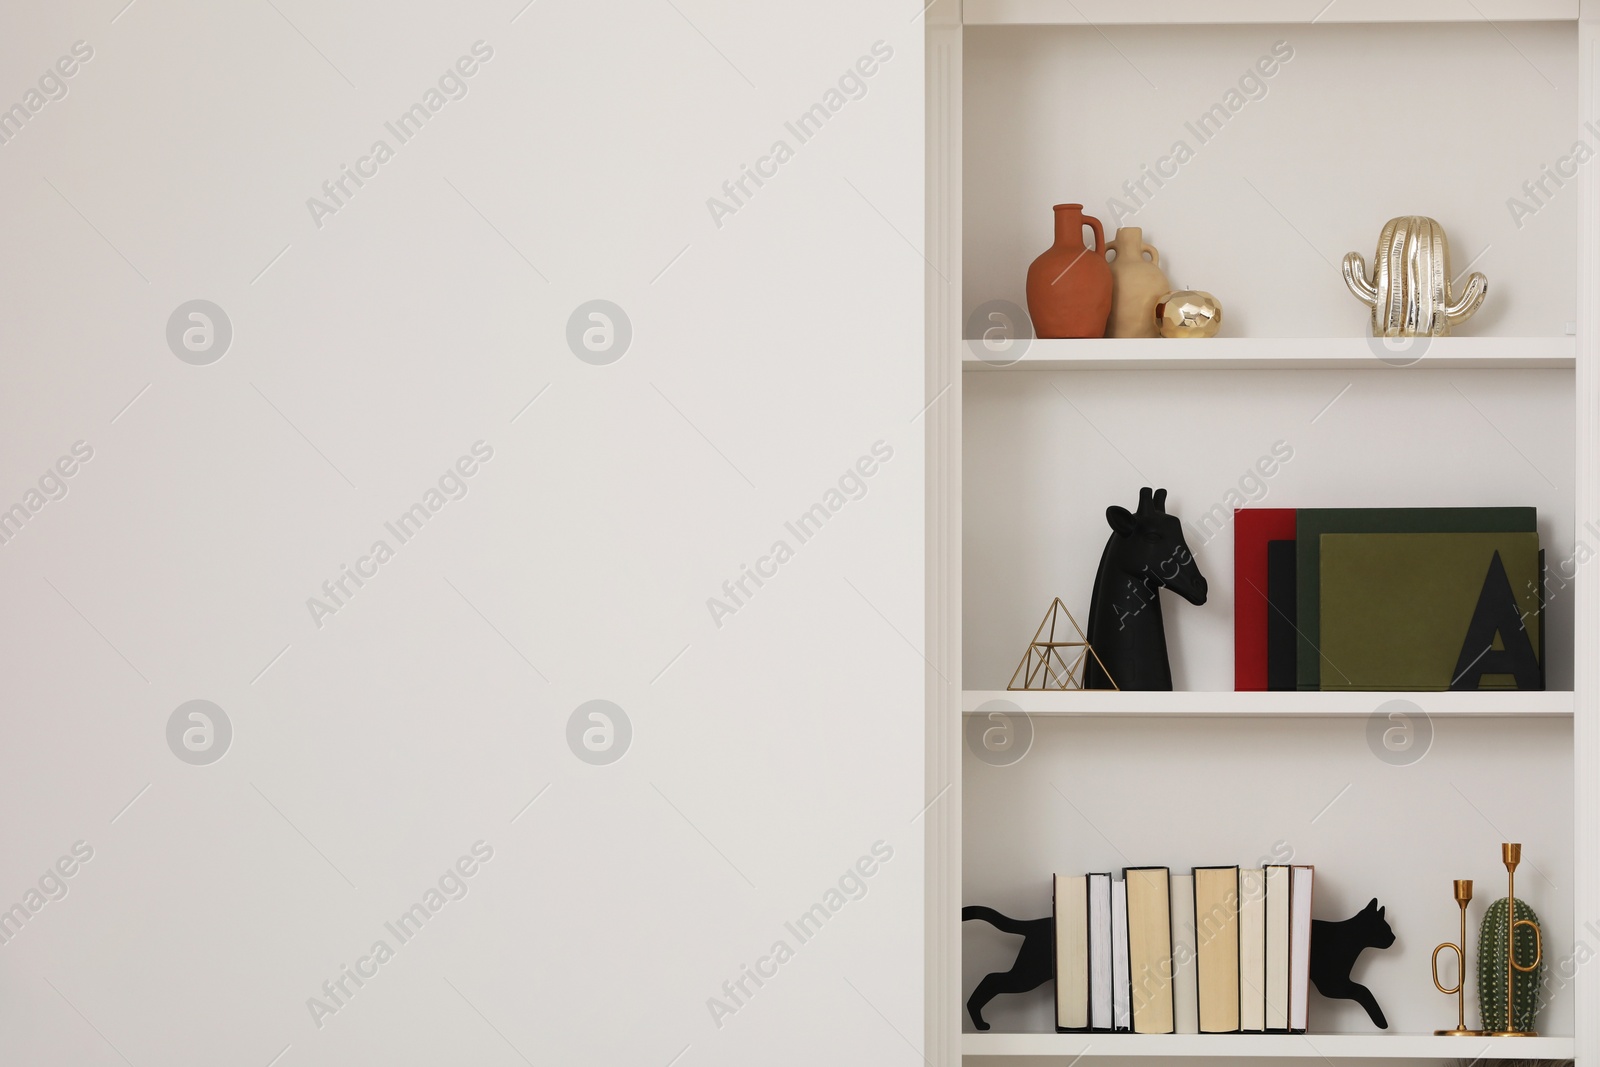 Photo of Stylish shelves with different decor elements indoors, space for text. Interior design